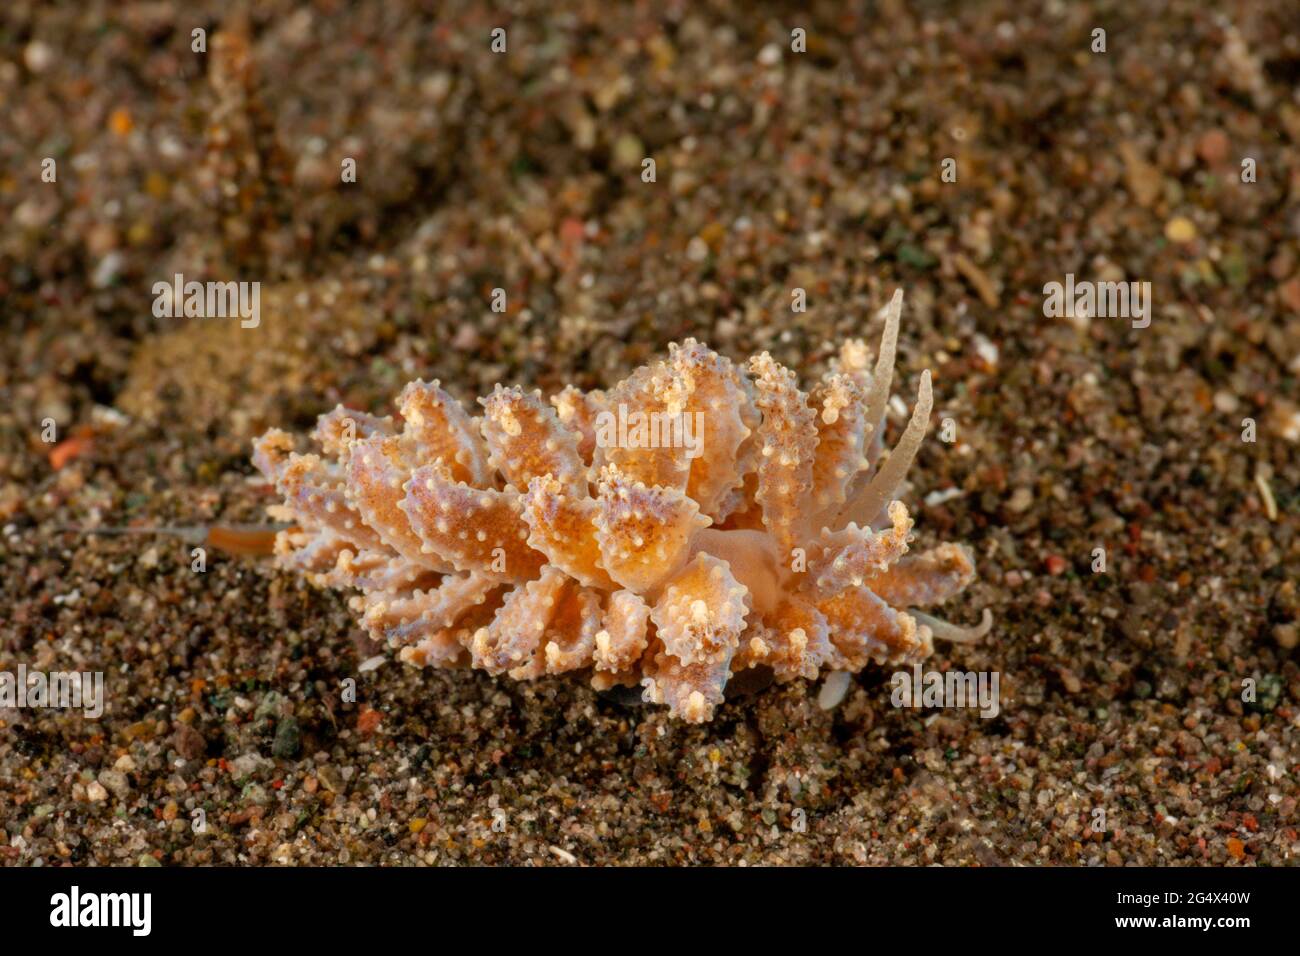 Cryptic Nudibranch, Phyllodesmium crypticum, with cerata with digestive gland ducts connected to zooxanthellae, on a sandy bottom in Horseshoe Bay off Stock Photo